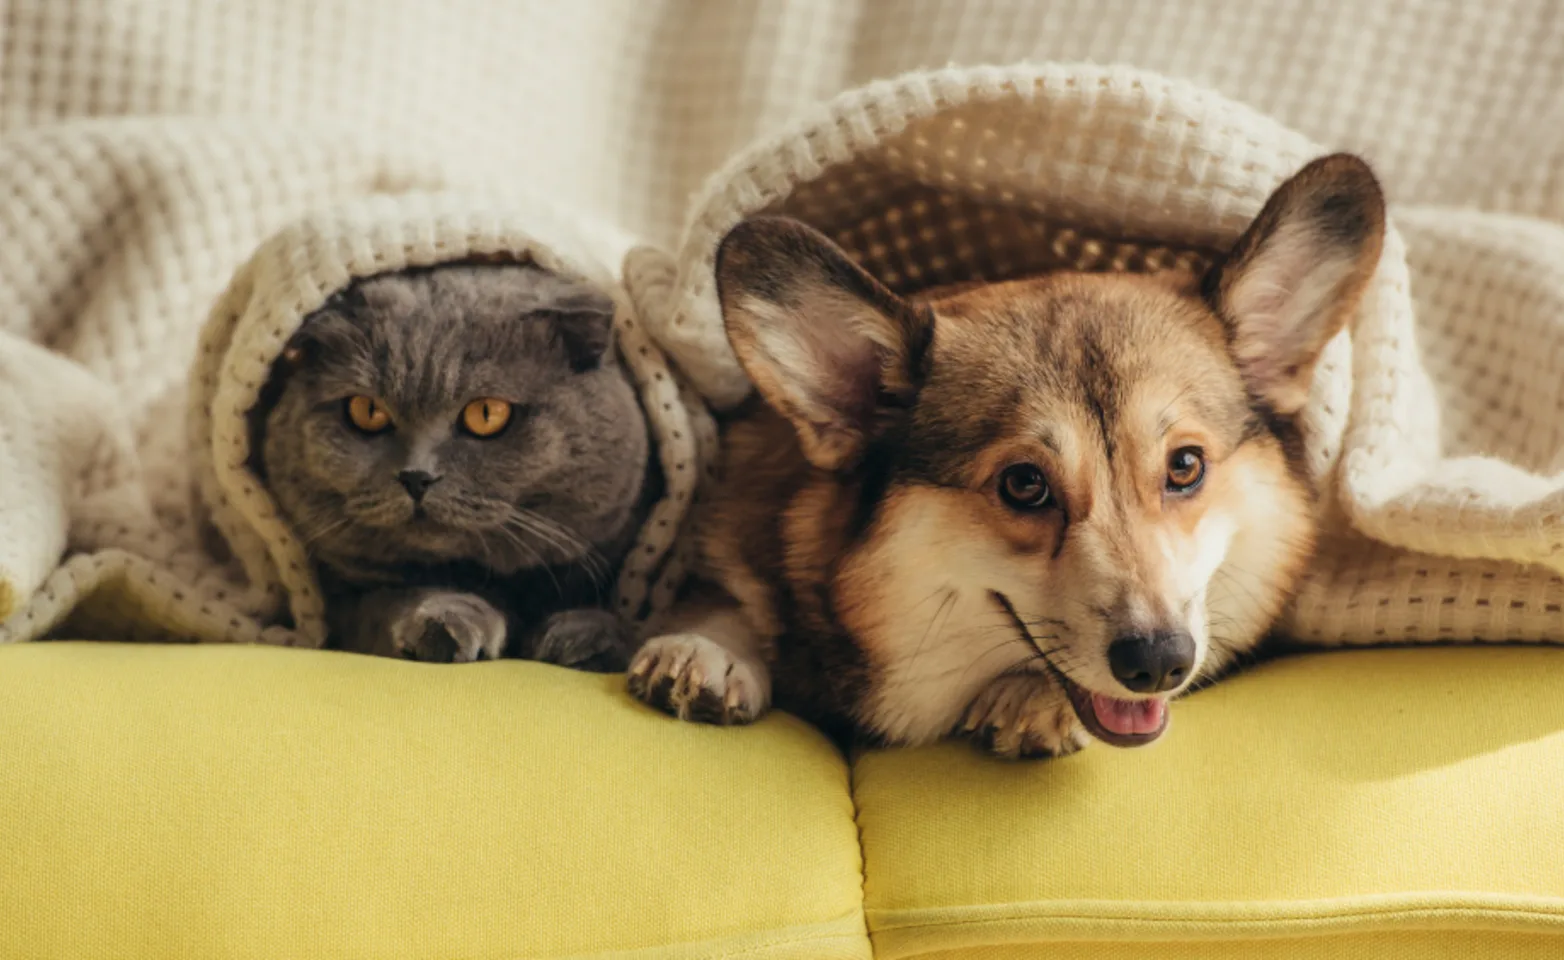 Corgi and grey cat laying under blankets on a yellow couch